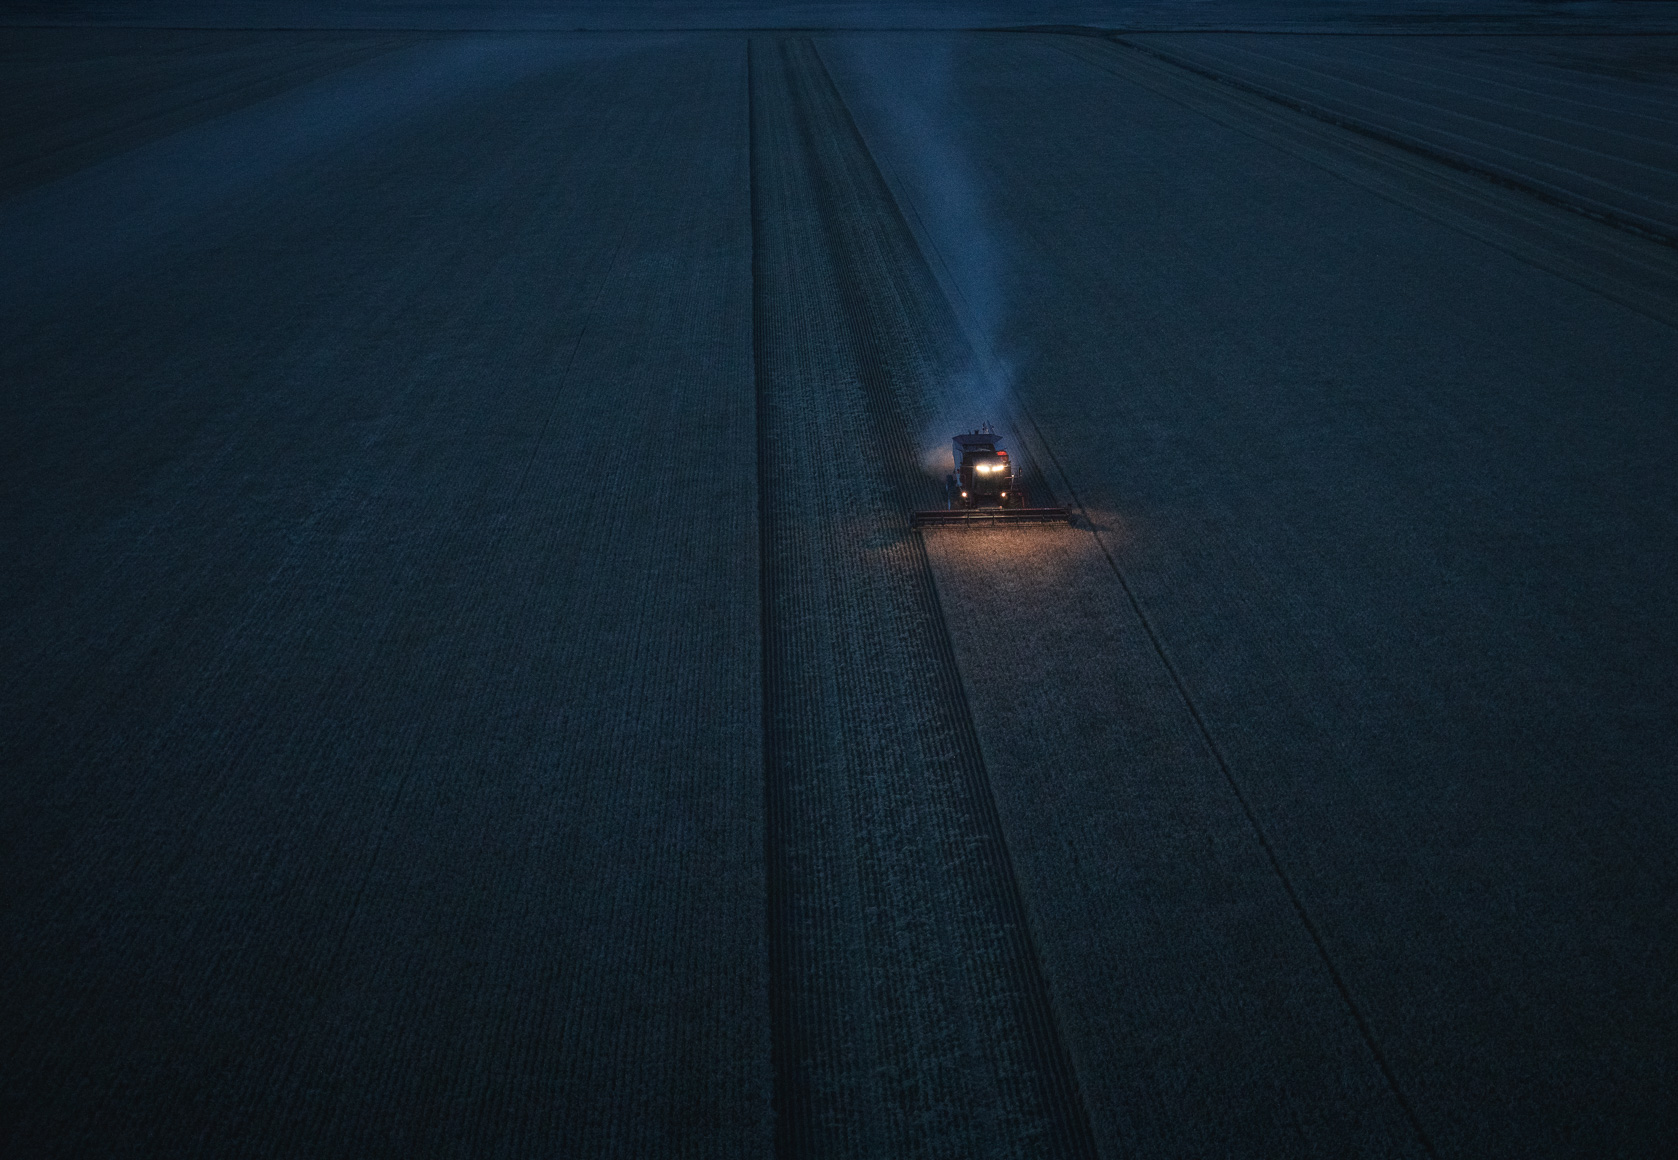 Michael Kunde Photo | Shell | Rotella | Overview | Agriculture